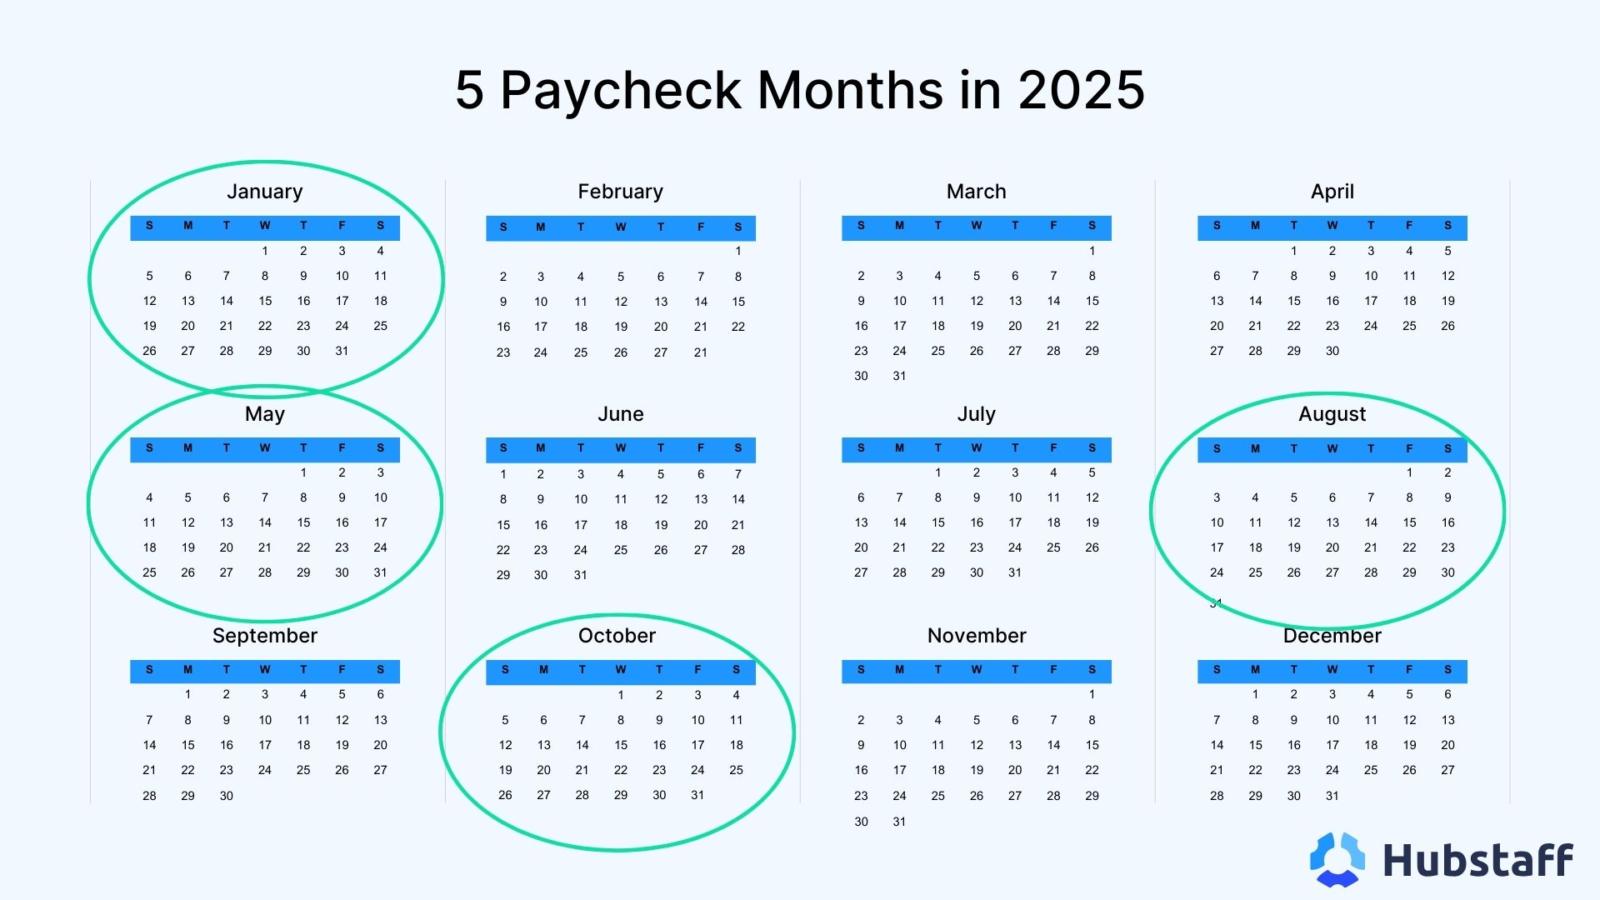 Five paycheck months in 2025